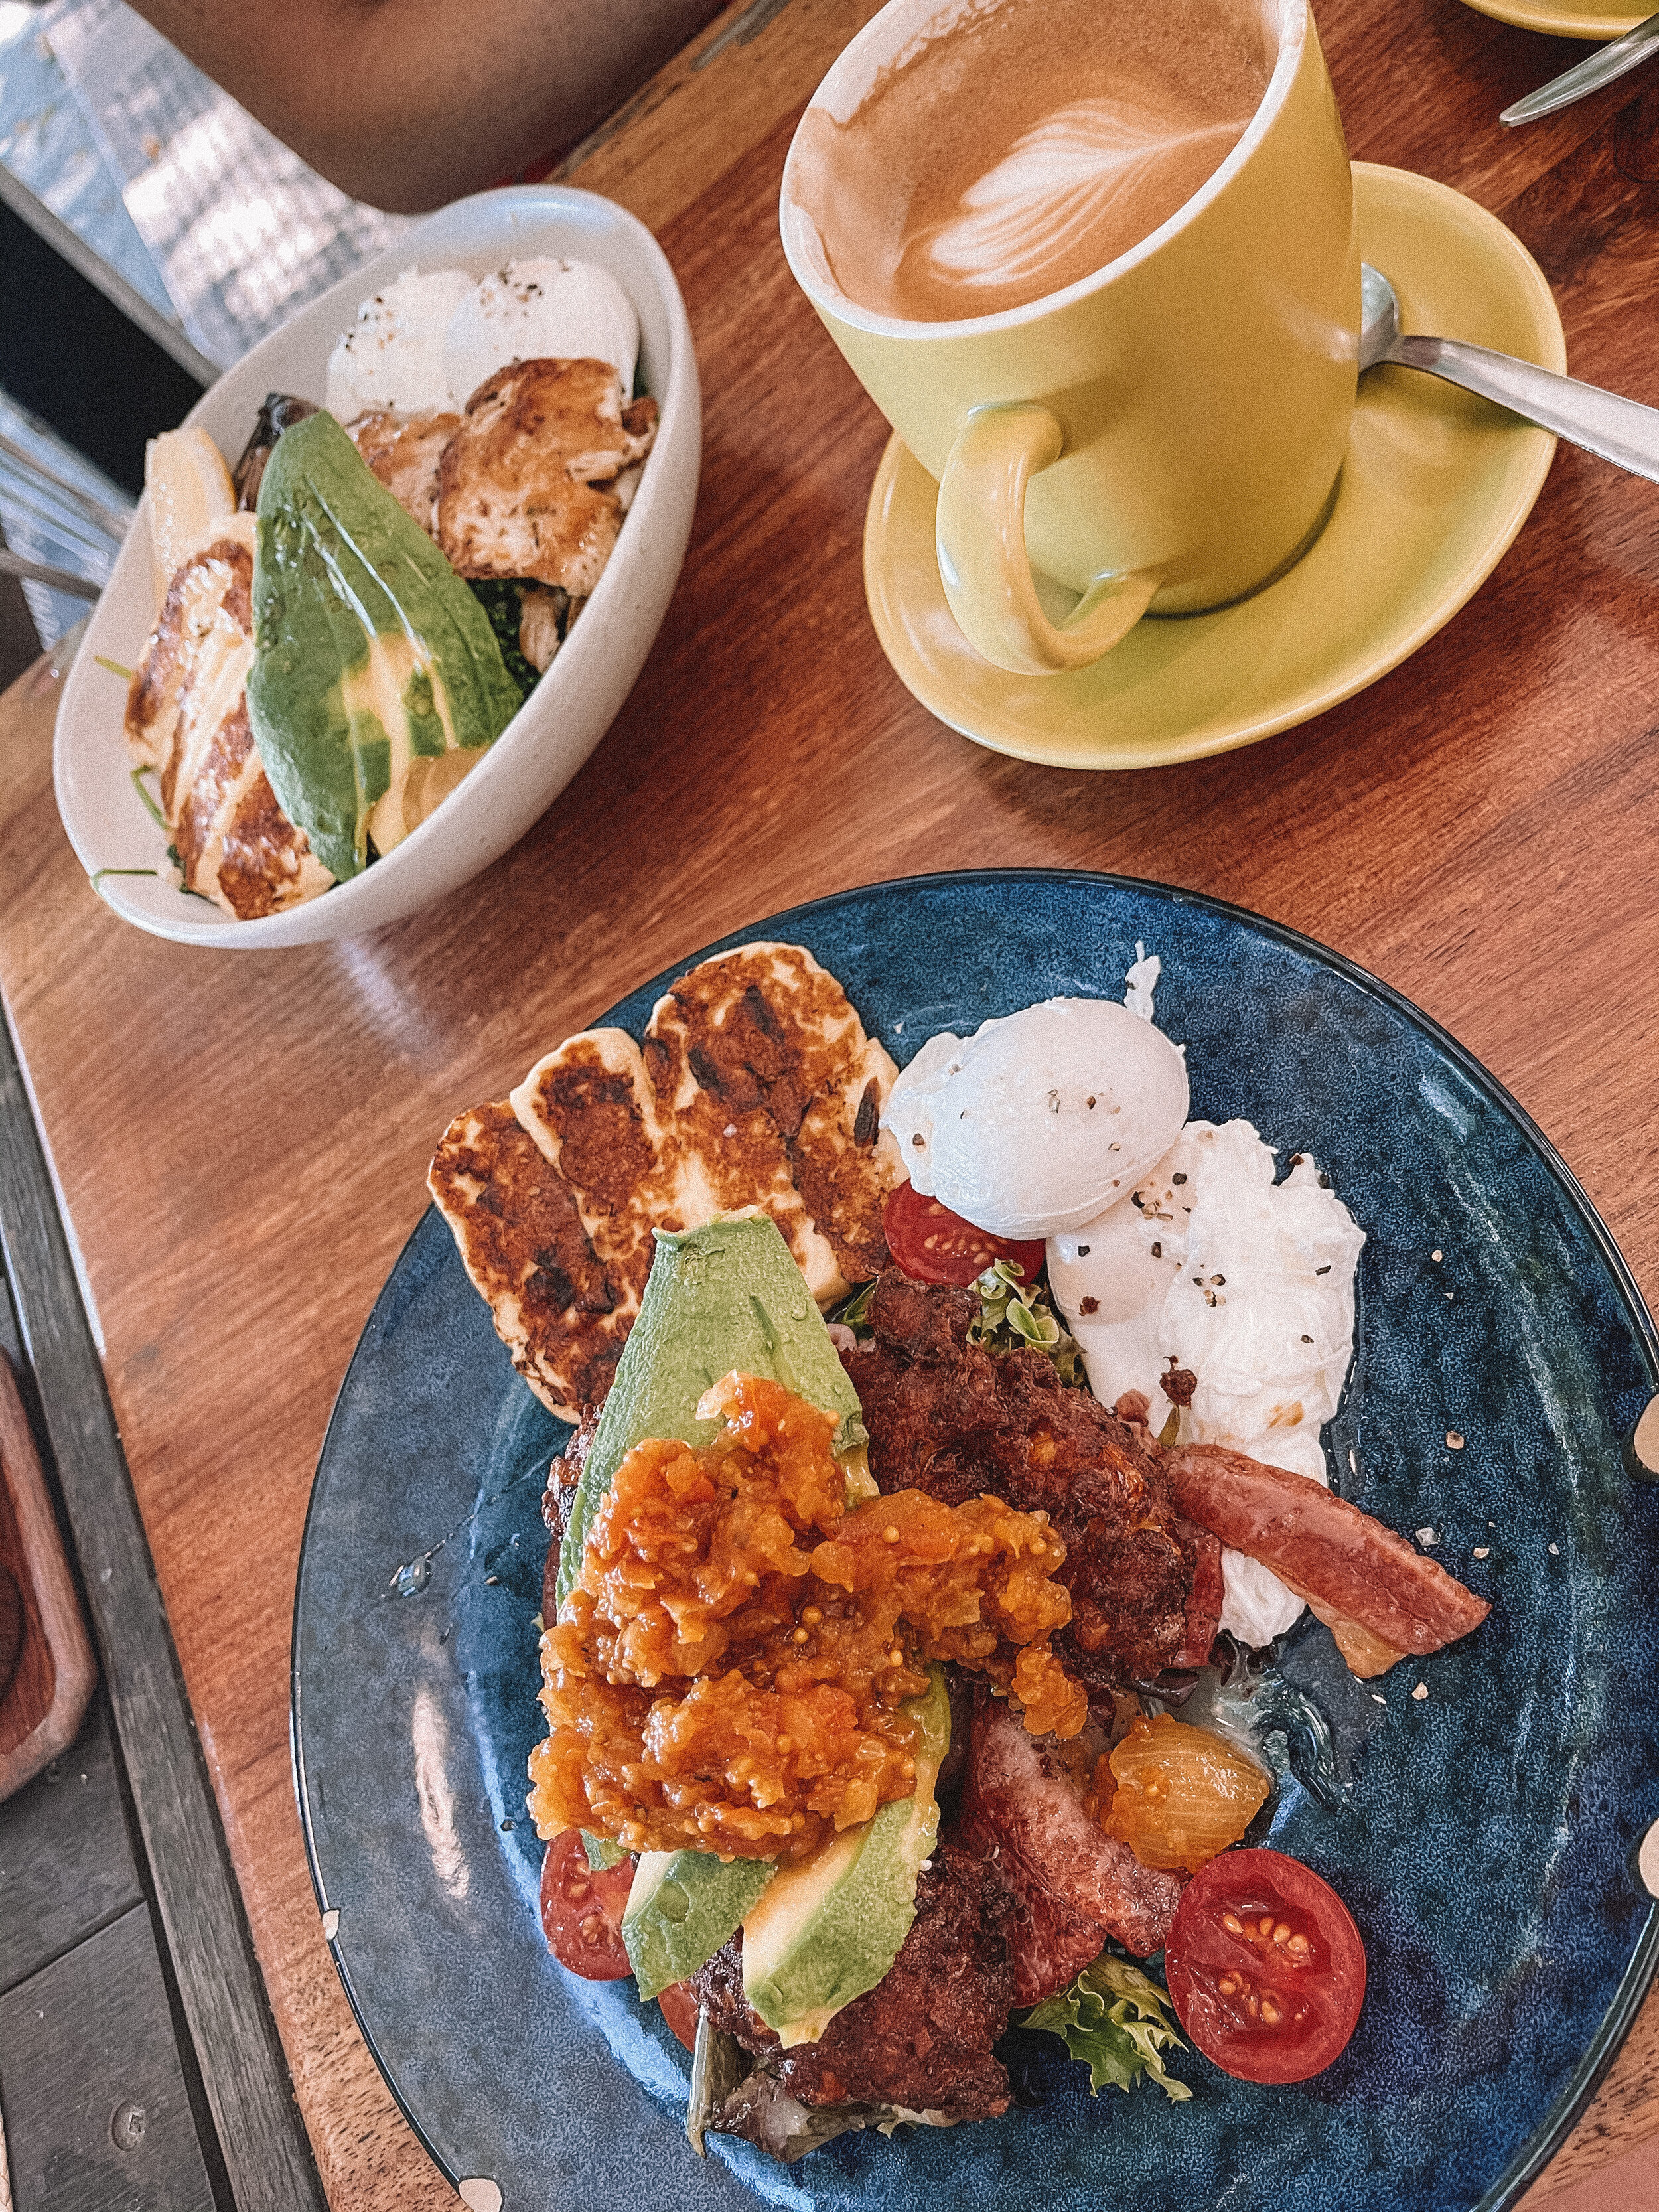 Breakfast at the Treehouse - Airlie Beach - Tropical North Queensland (QLD) - Australia